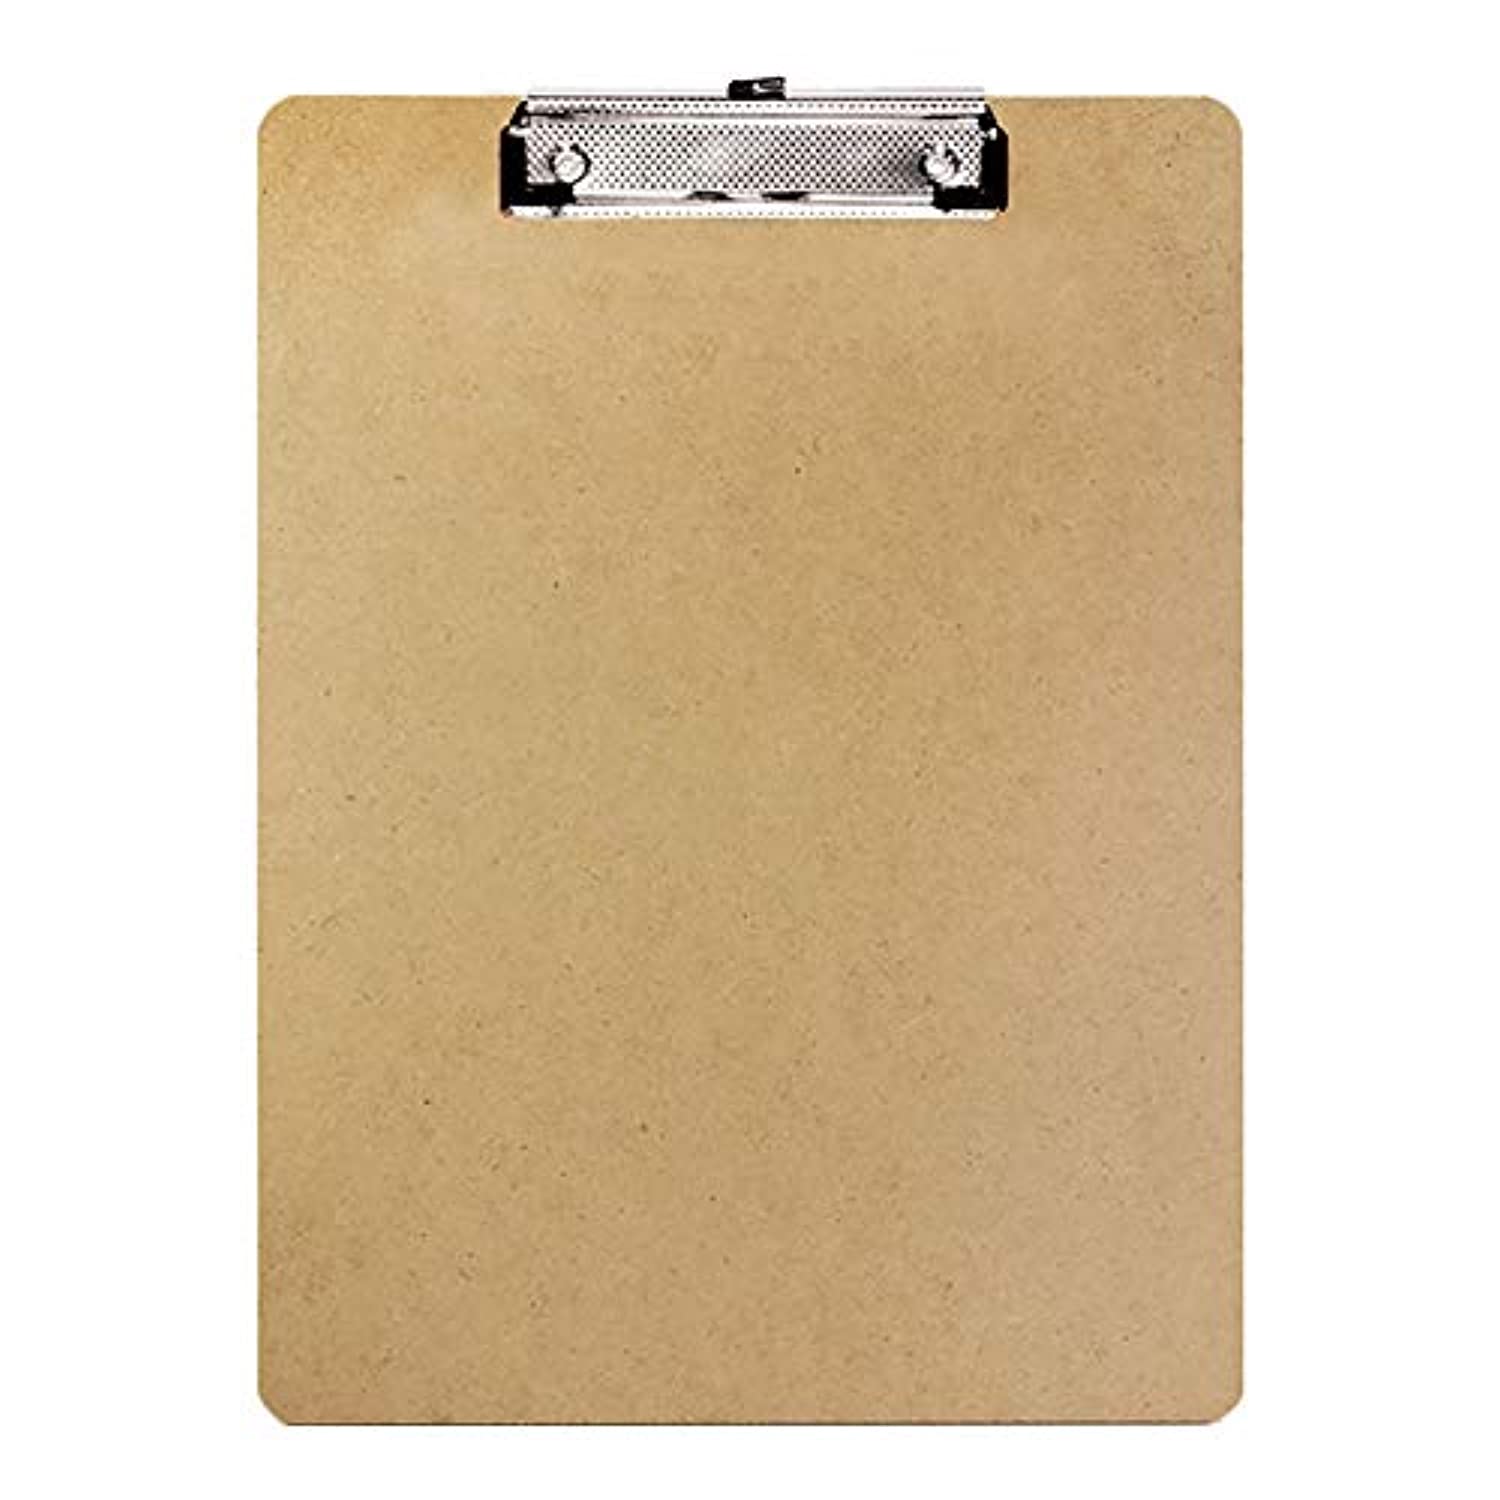 Low Profile Clip, 12.5" x 9" Fit A4 Letter Size Paperboard, Business Office School Teacher Student College, 1-Pack.